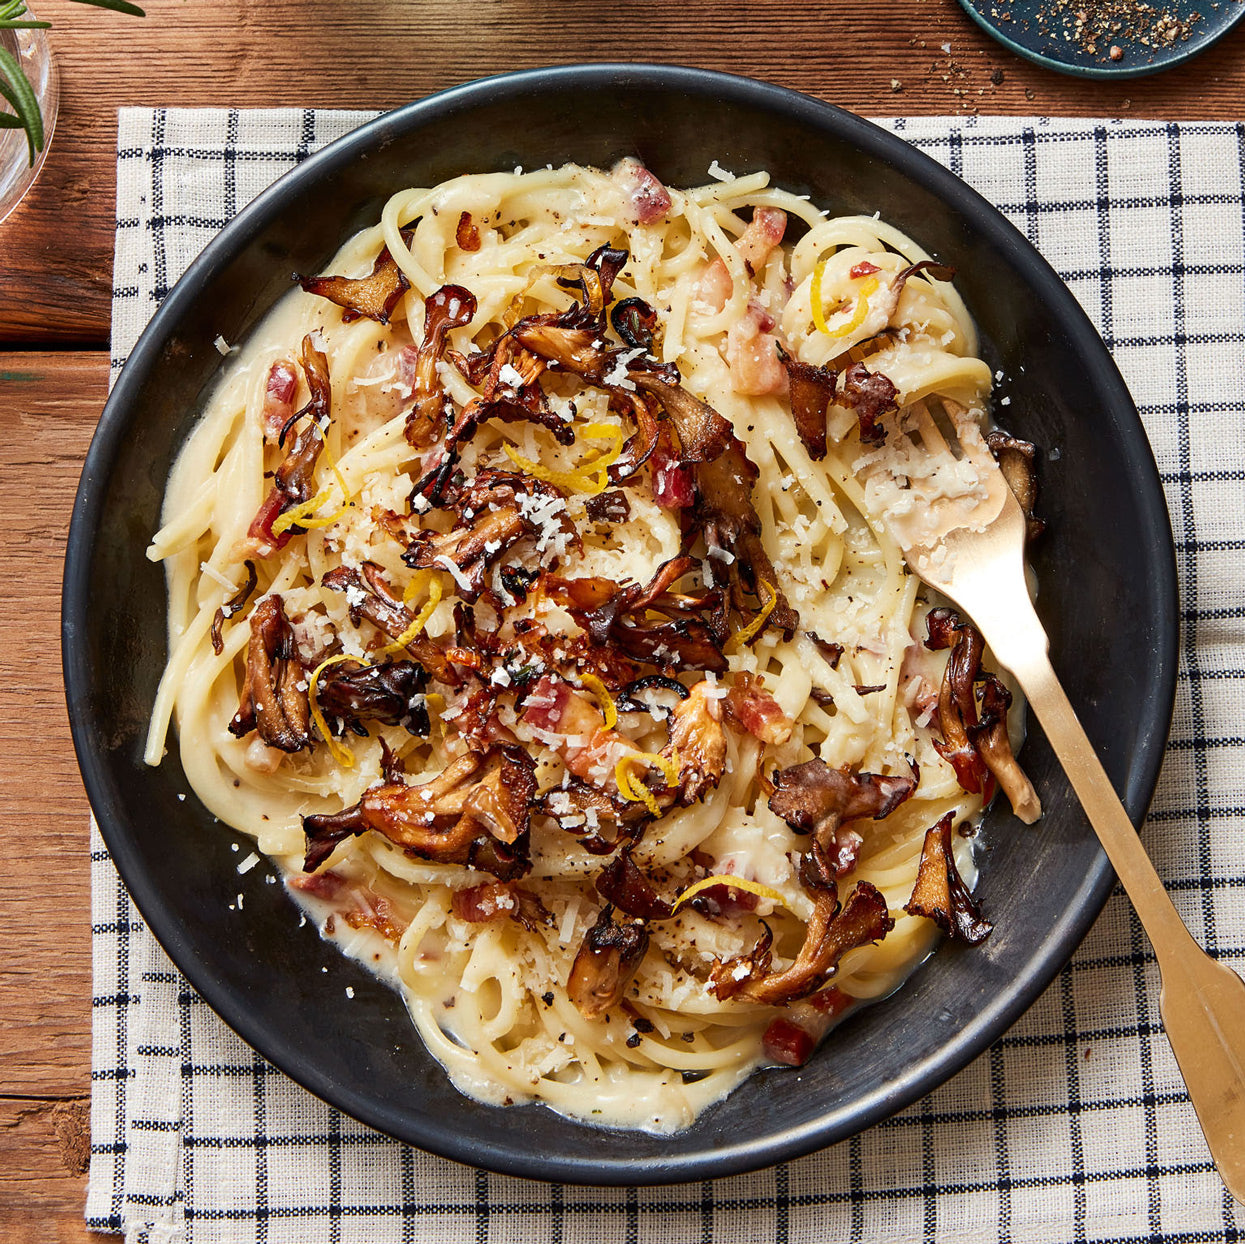 Pasta alla Gricia with Roasted Hen-of-the-Woods & Shallots